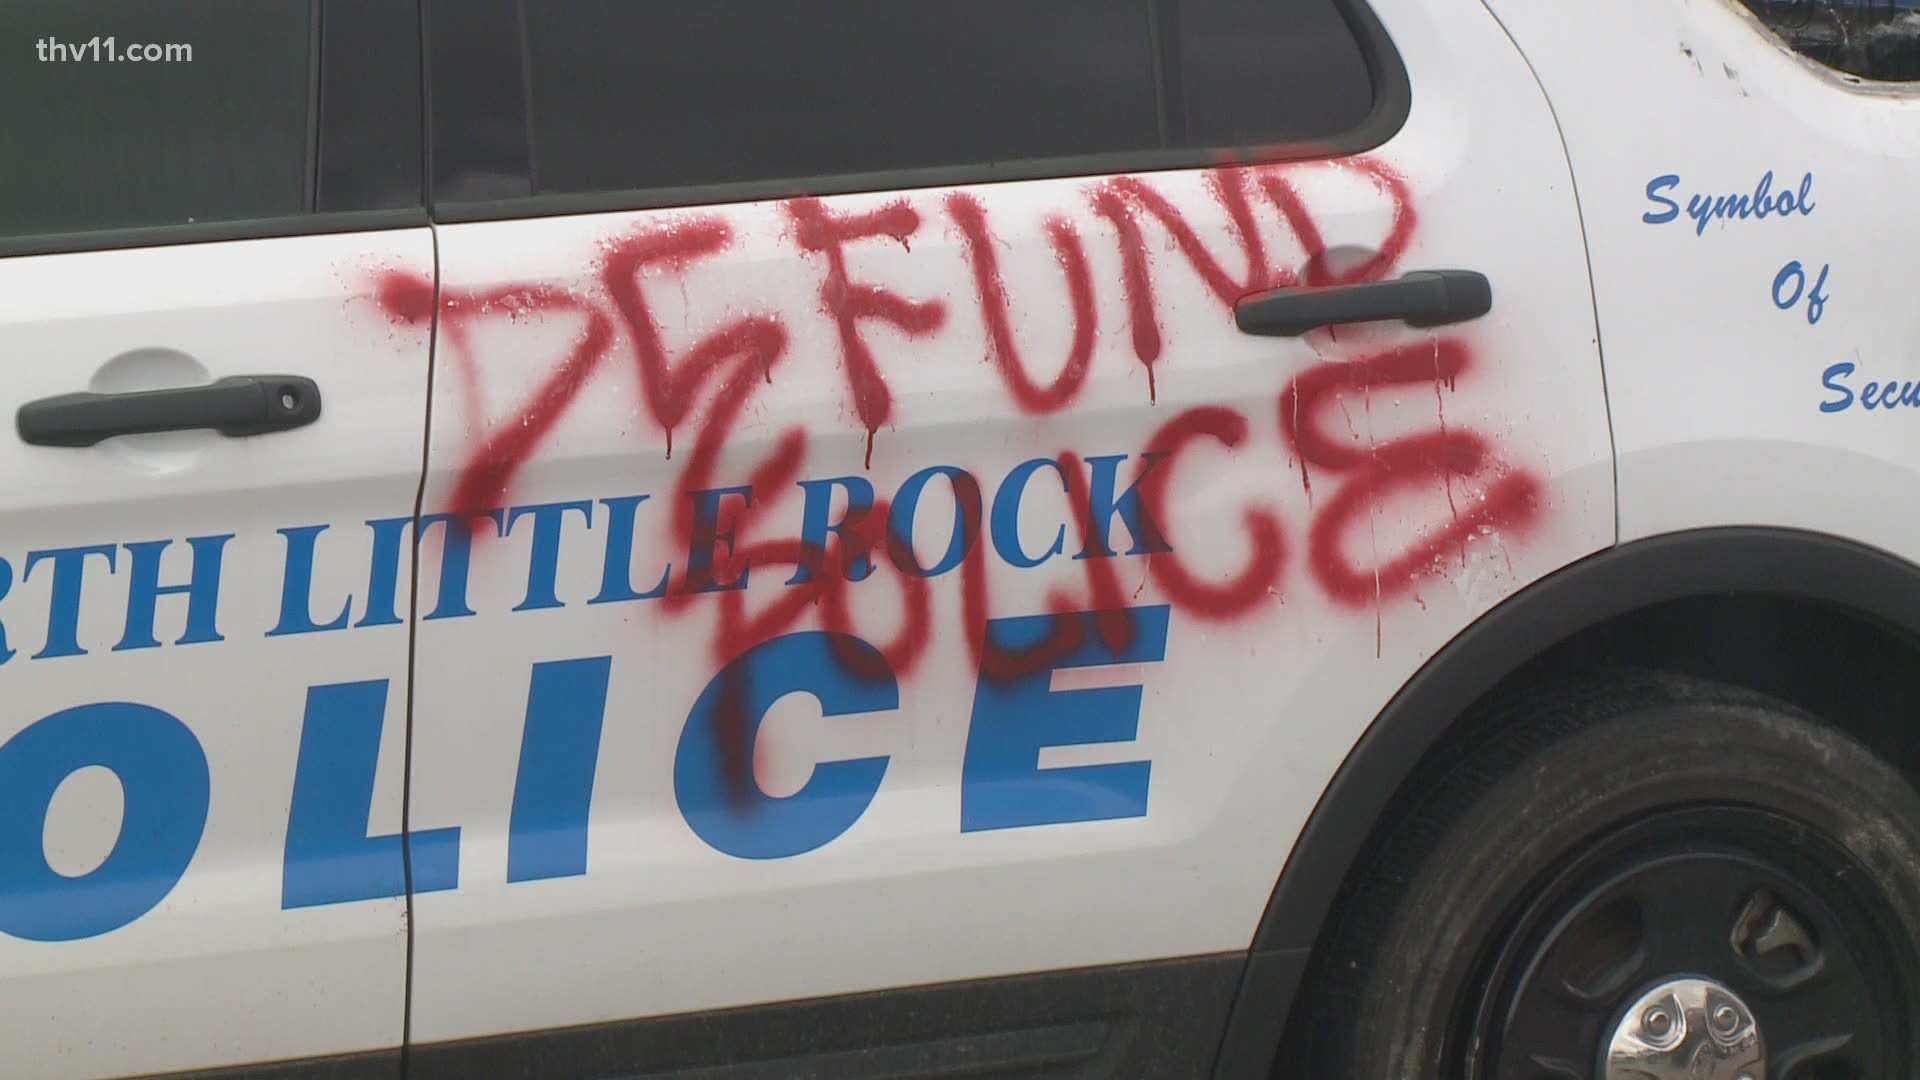 The Little Rock Police Department was vandalized overnight, with messages to 'defund the police.'